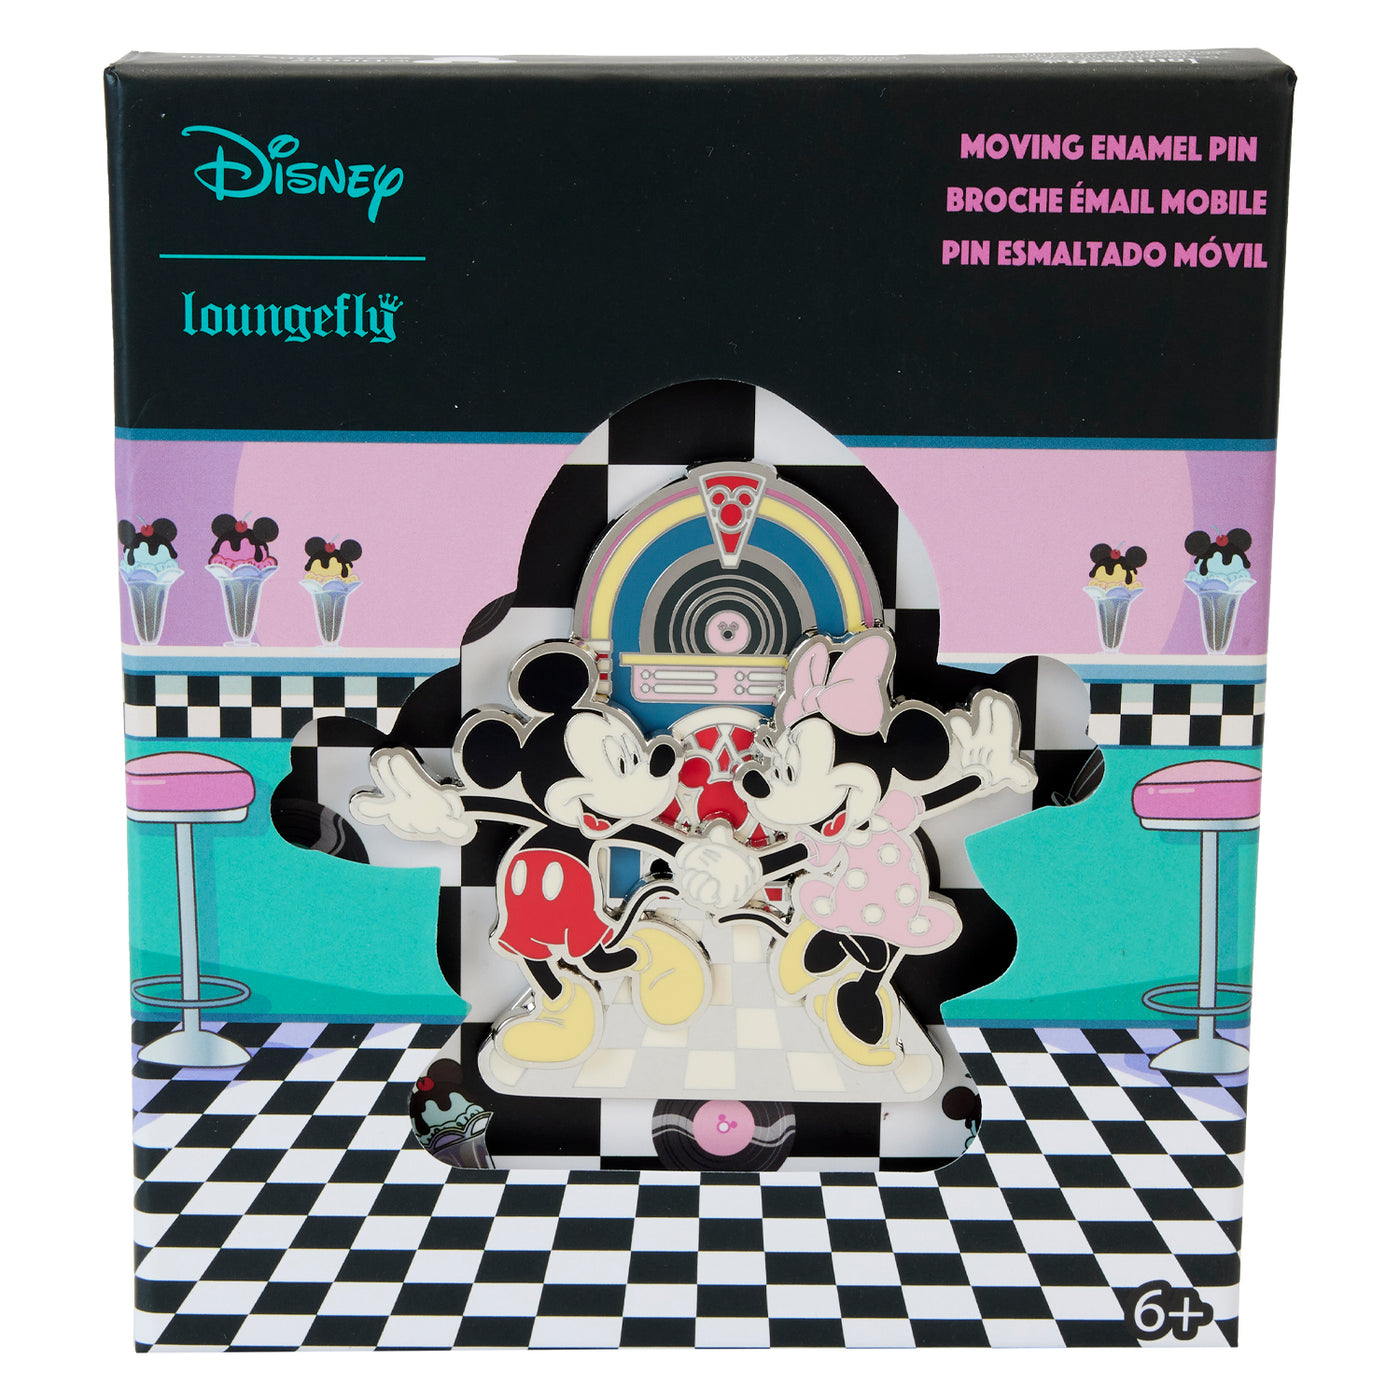 Disney Mickey and Minnie Date Night Jukebox 3" Collector Pin